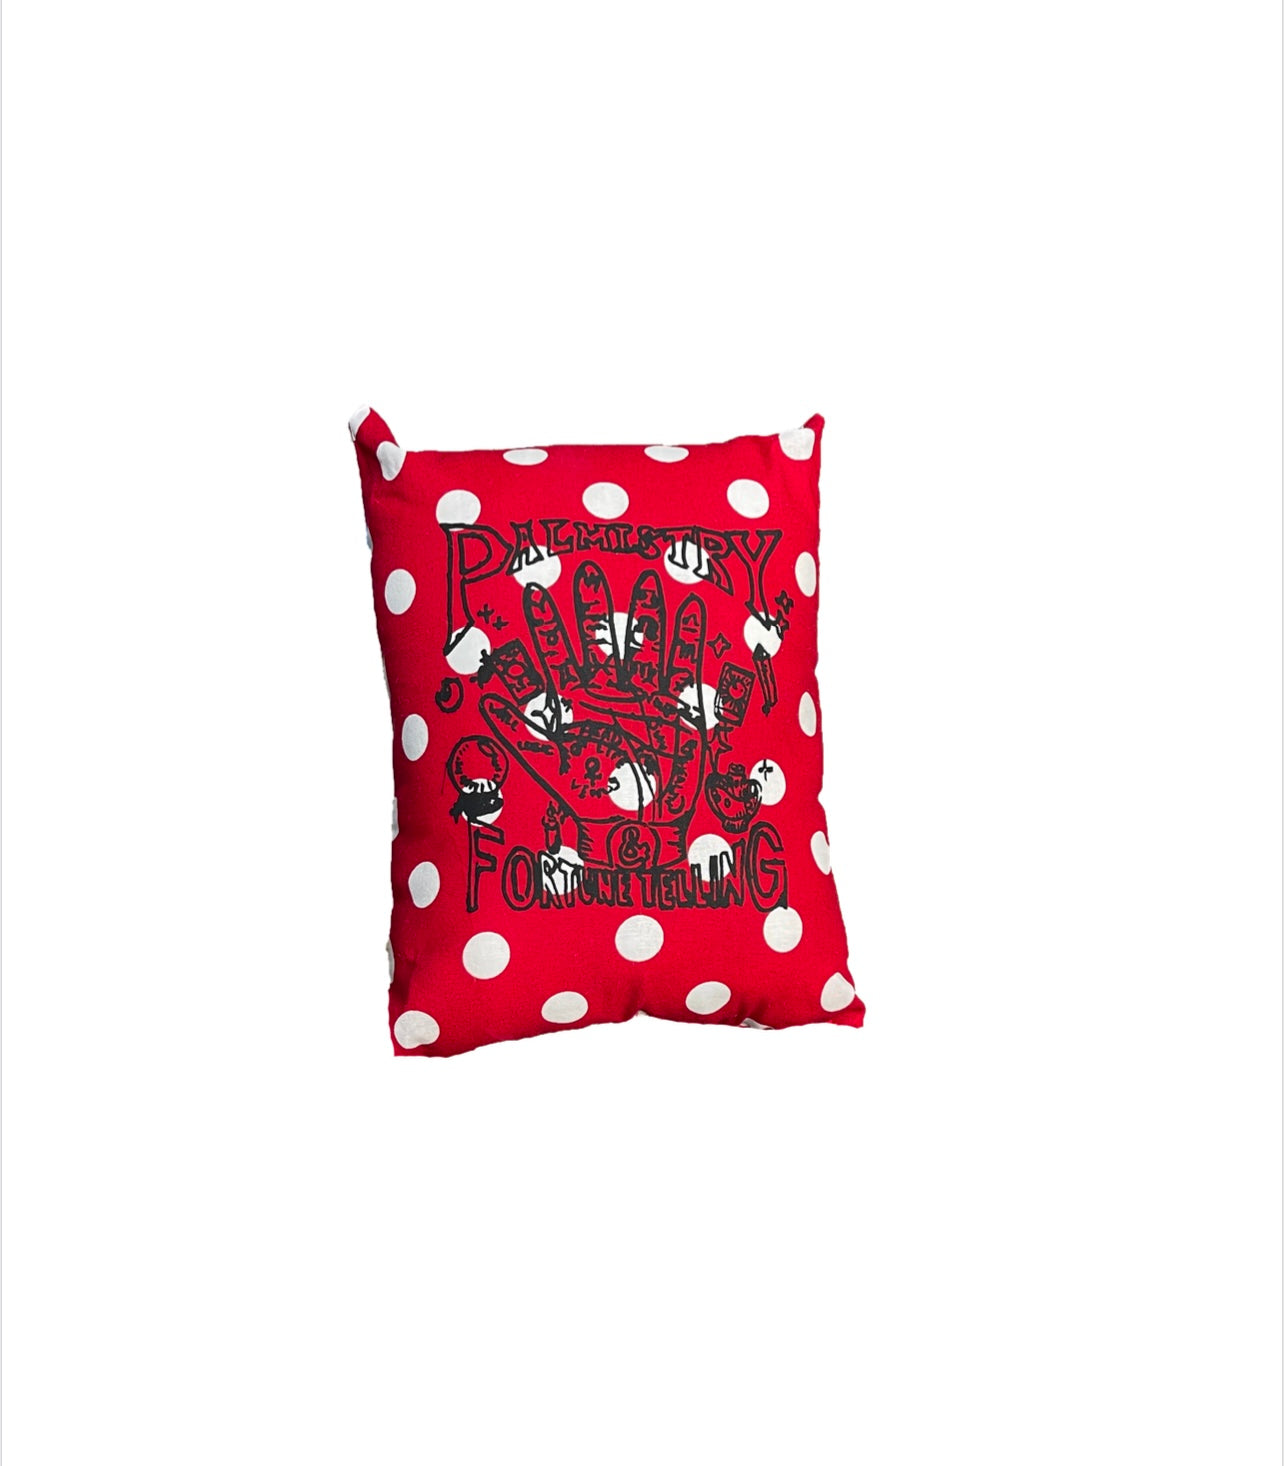 Polka Dot Palmistry and Fortune Telling Pillow